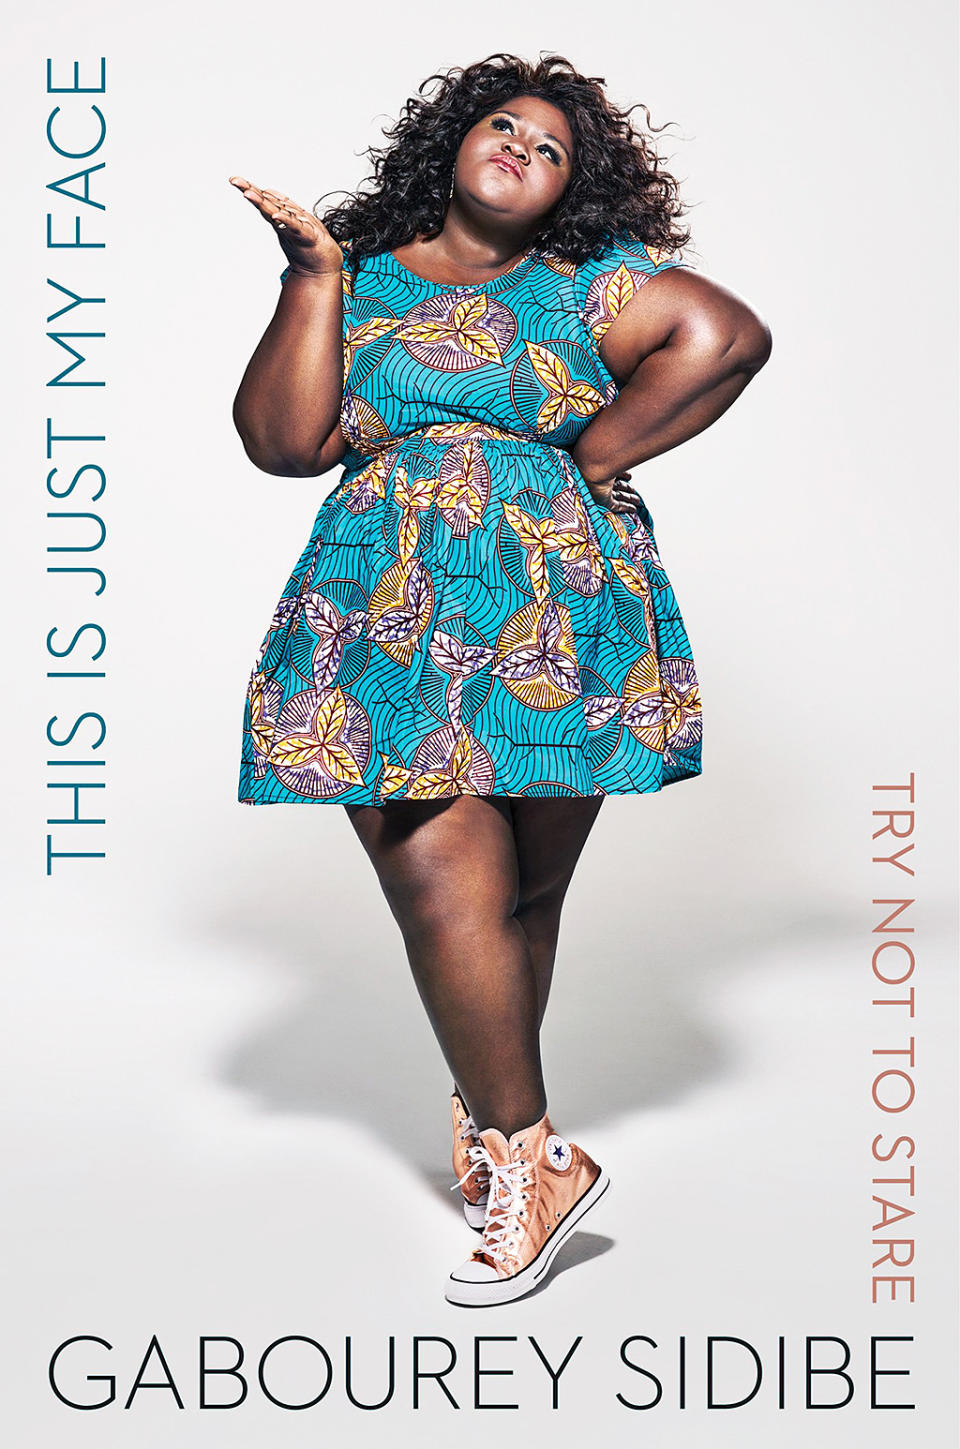 ‘This Is Just My Face: Try Not to Stare’ by Gabourey Sidibe